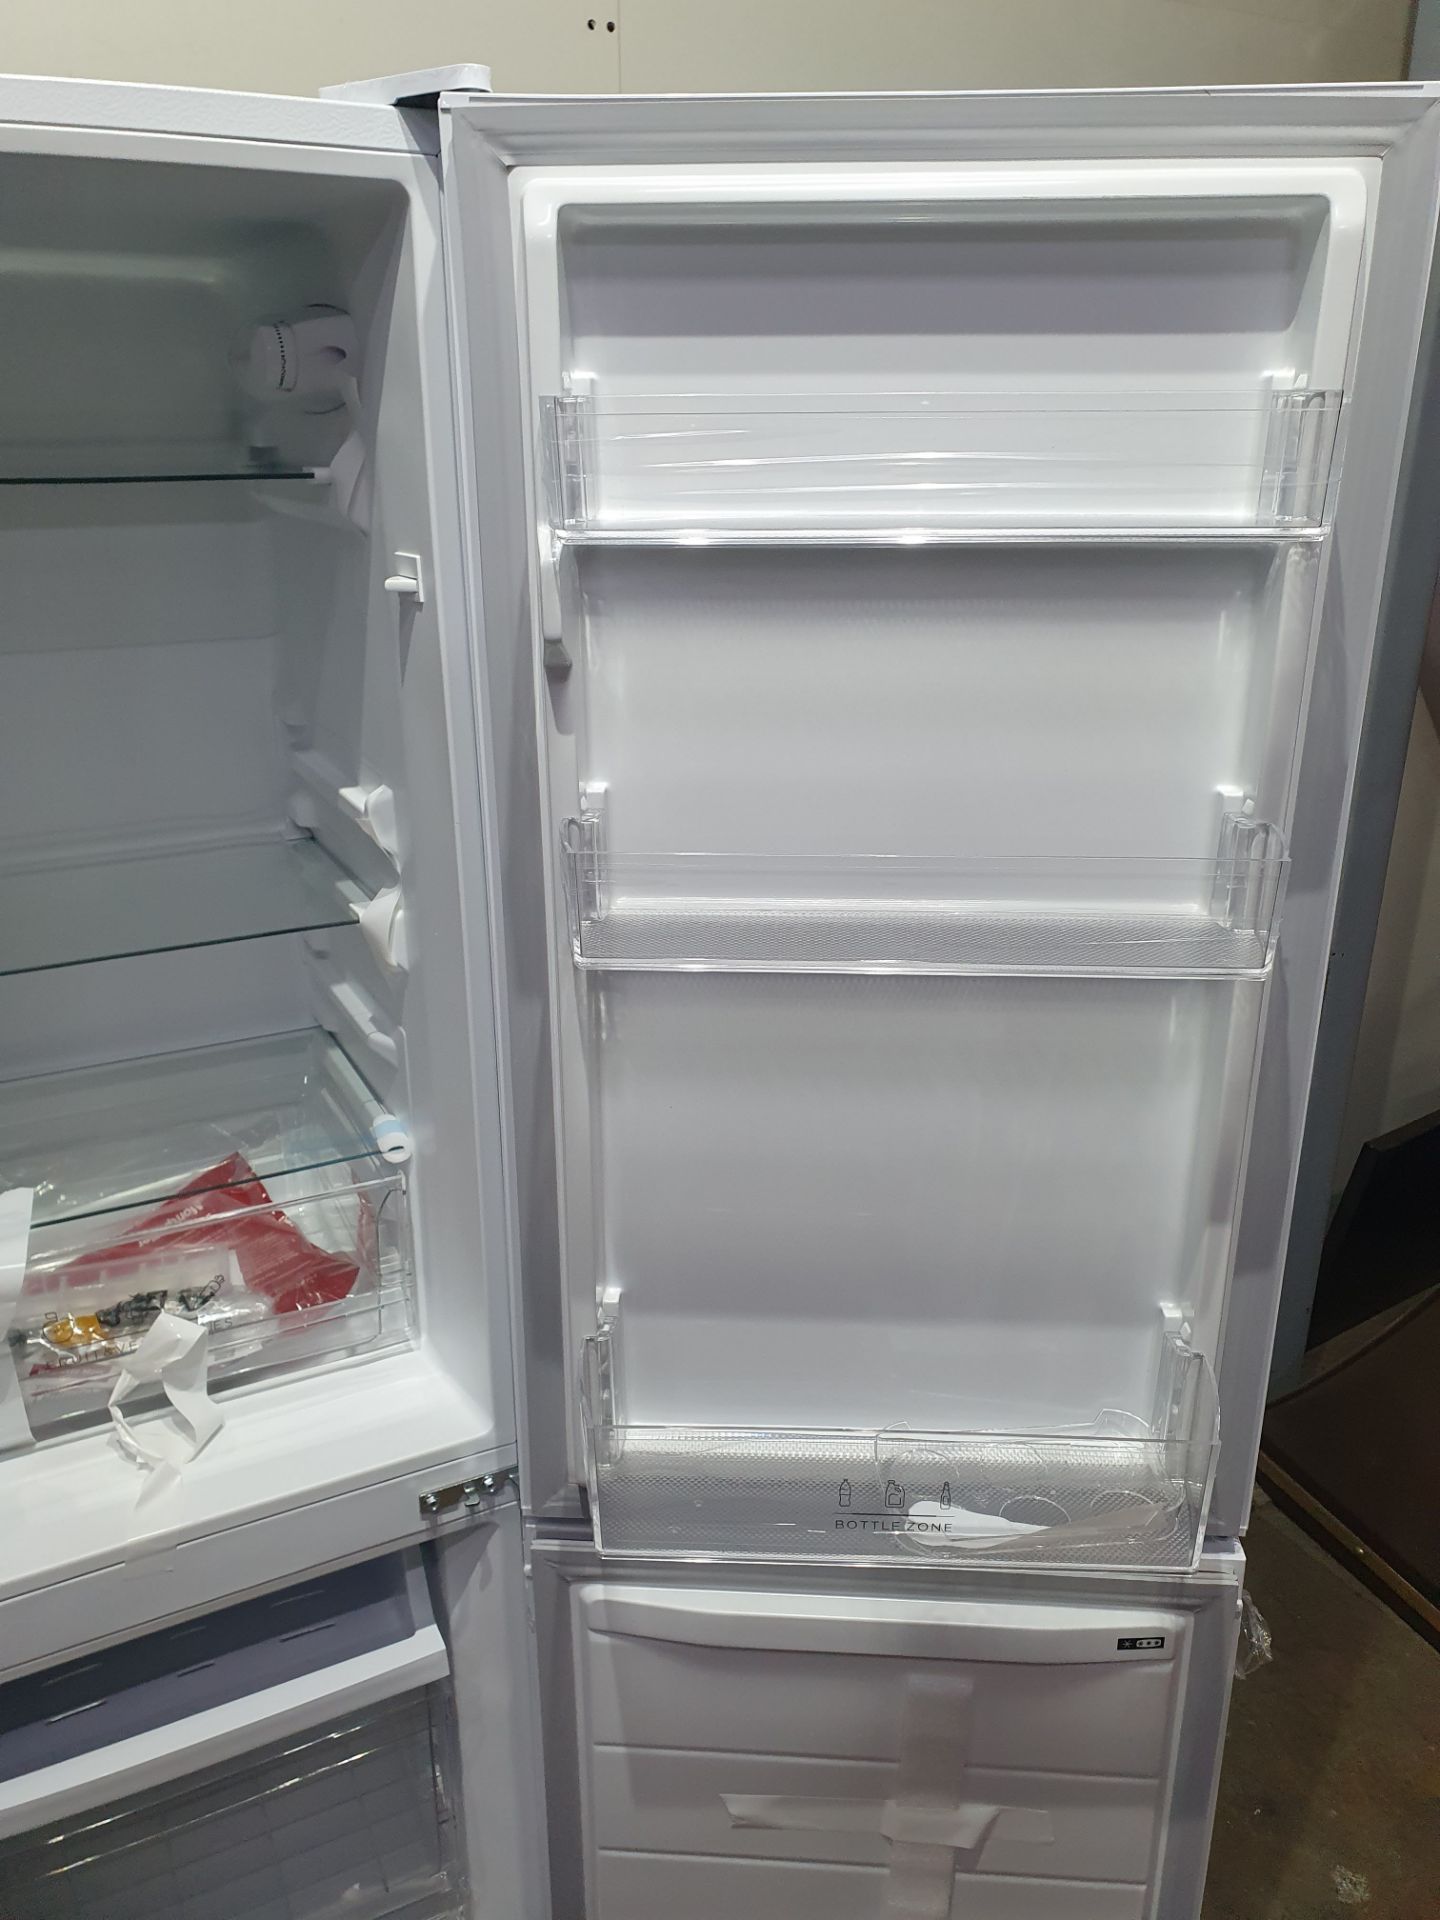 Ex-Display Montpellier MS150W Low Frost Fridge Freezer in White - Image 6 of 12